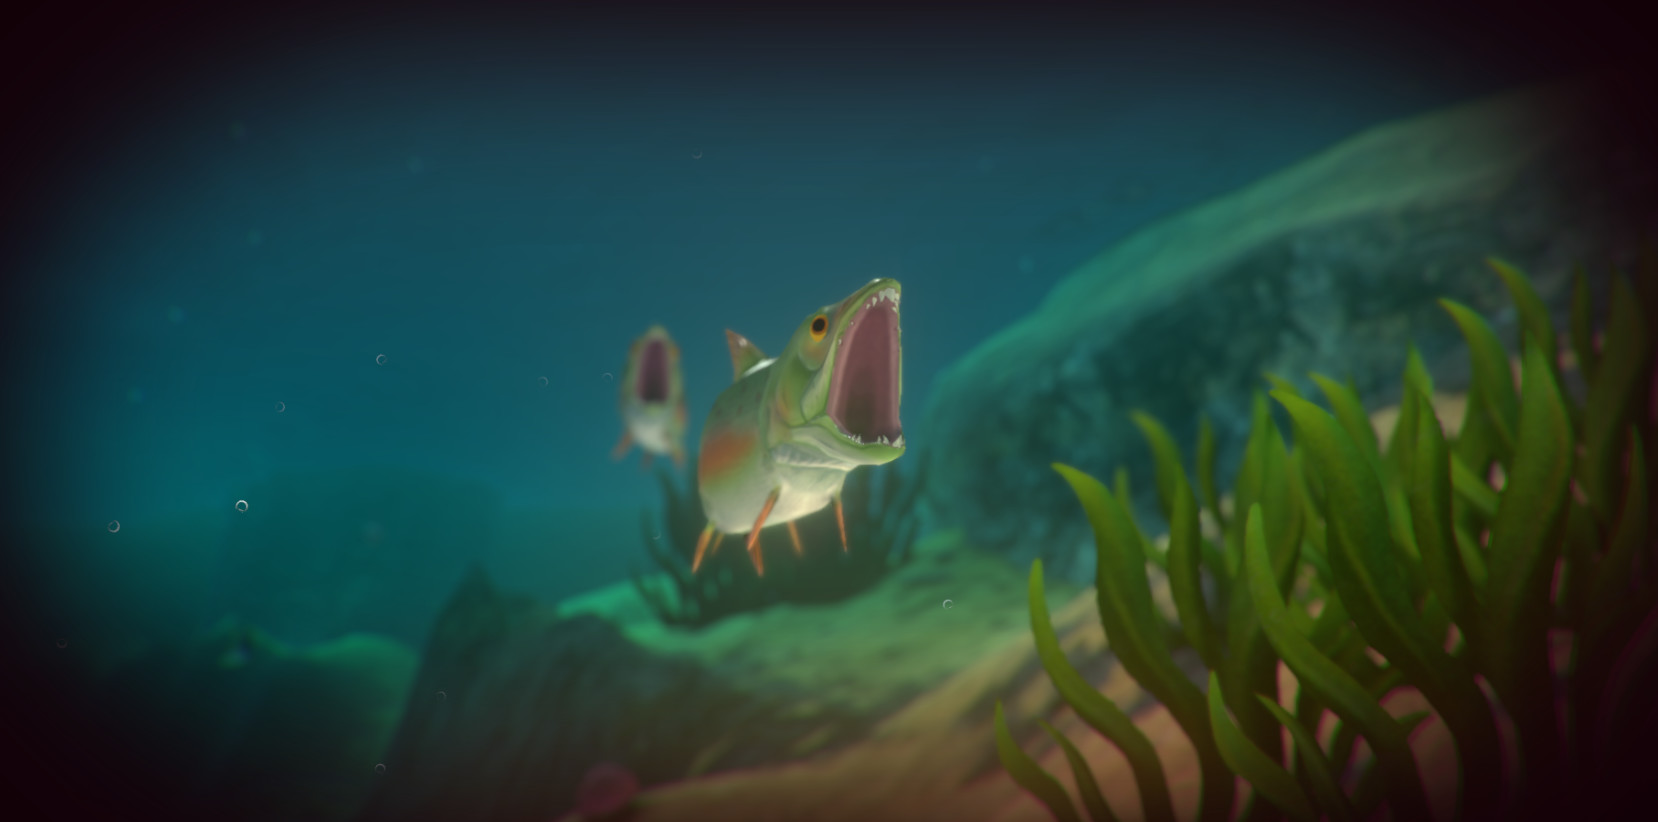 Feed and Grow: Fish System Requirements - Can I Run It? - PCGameBenchmark